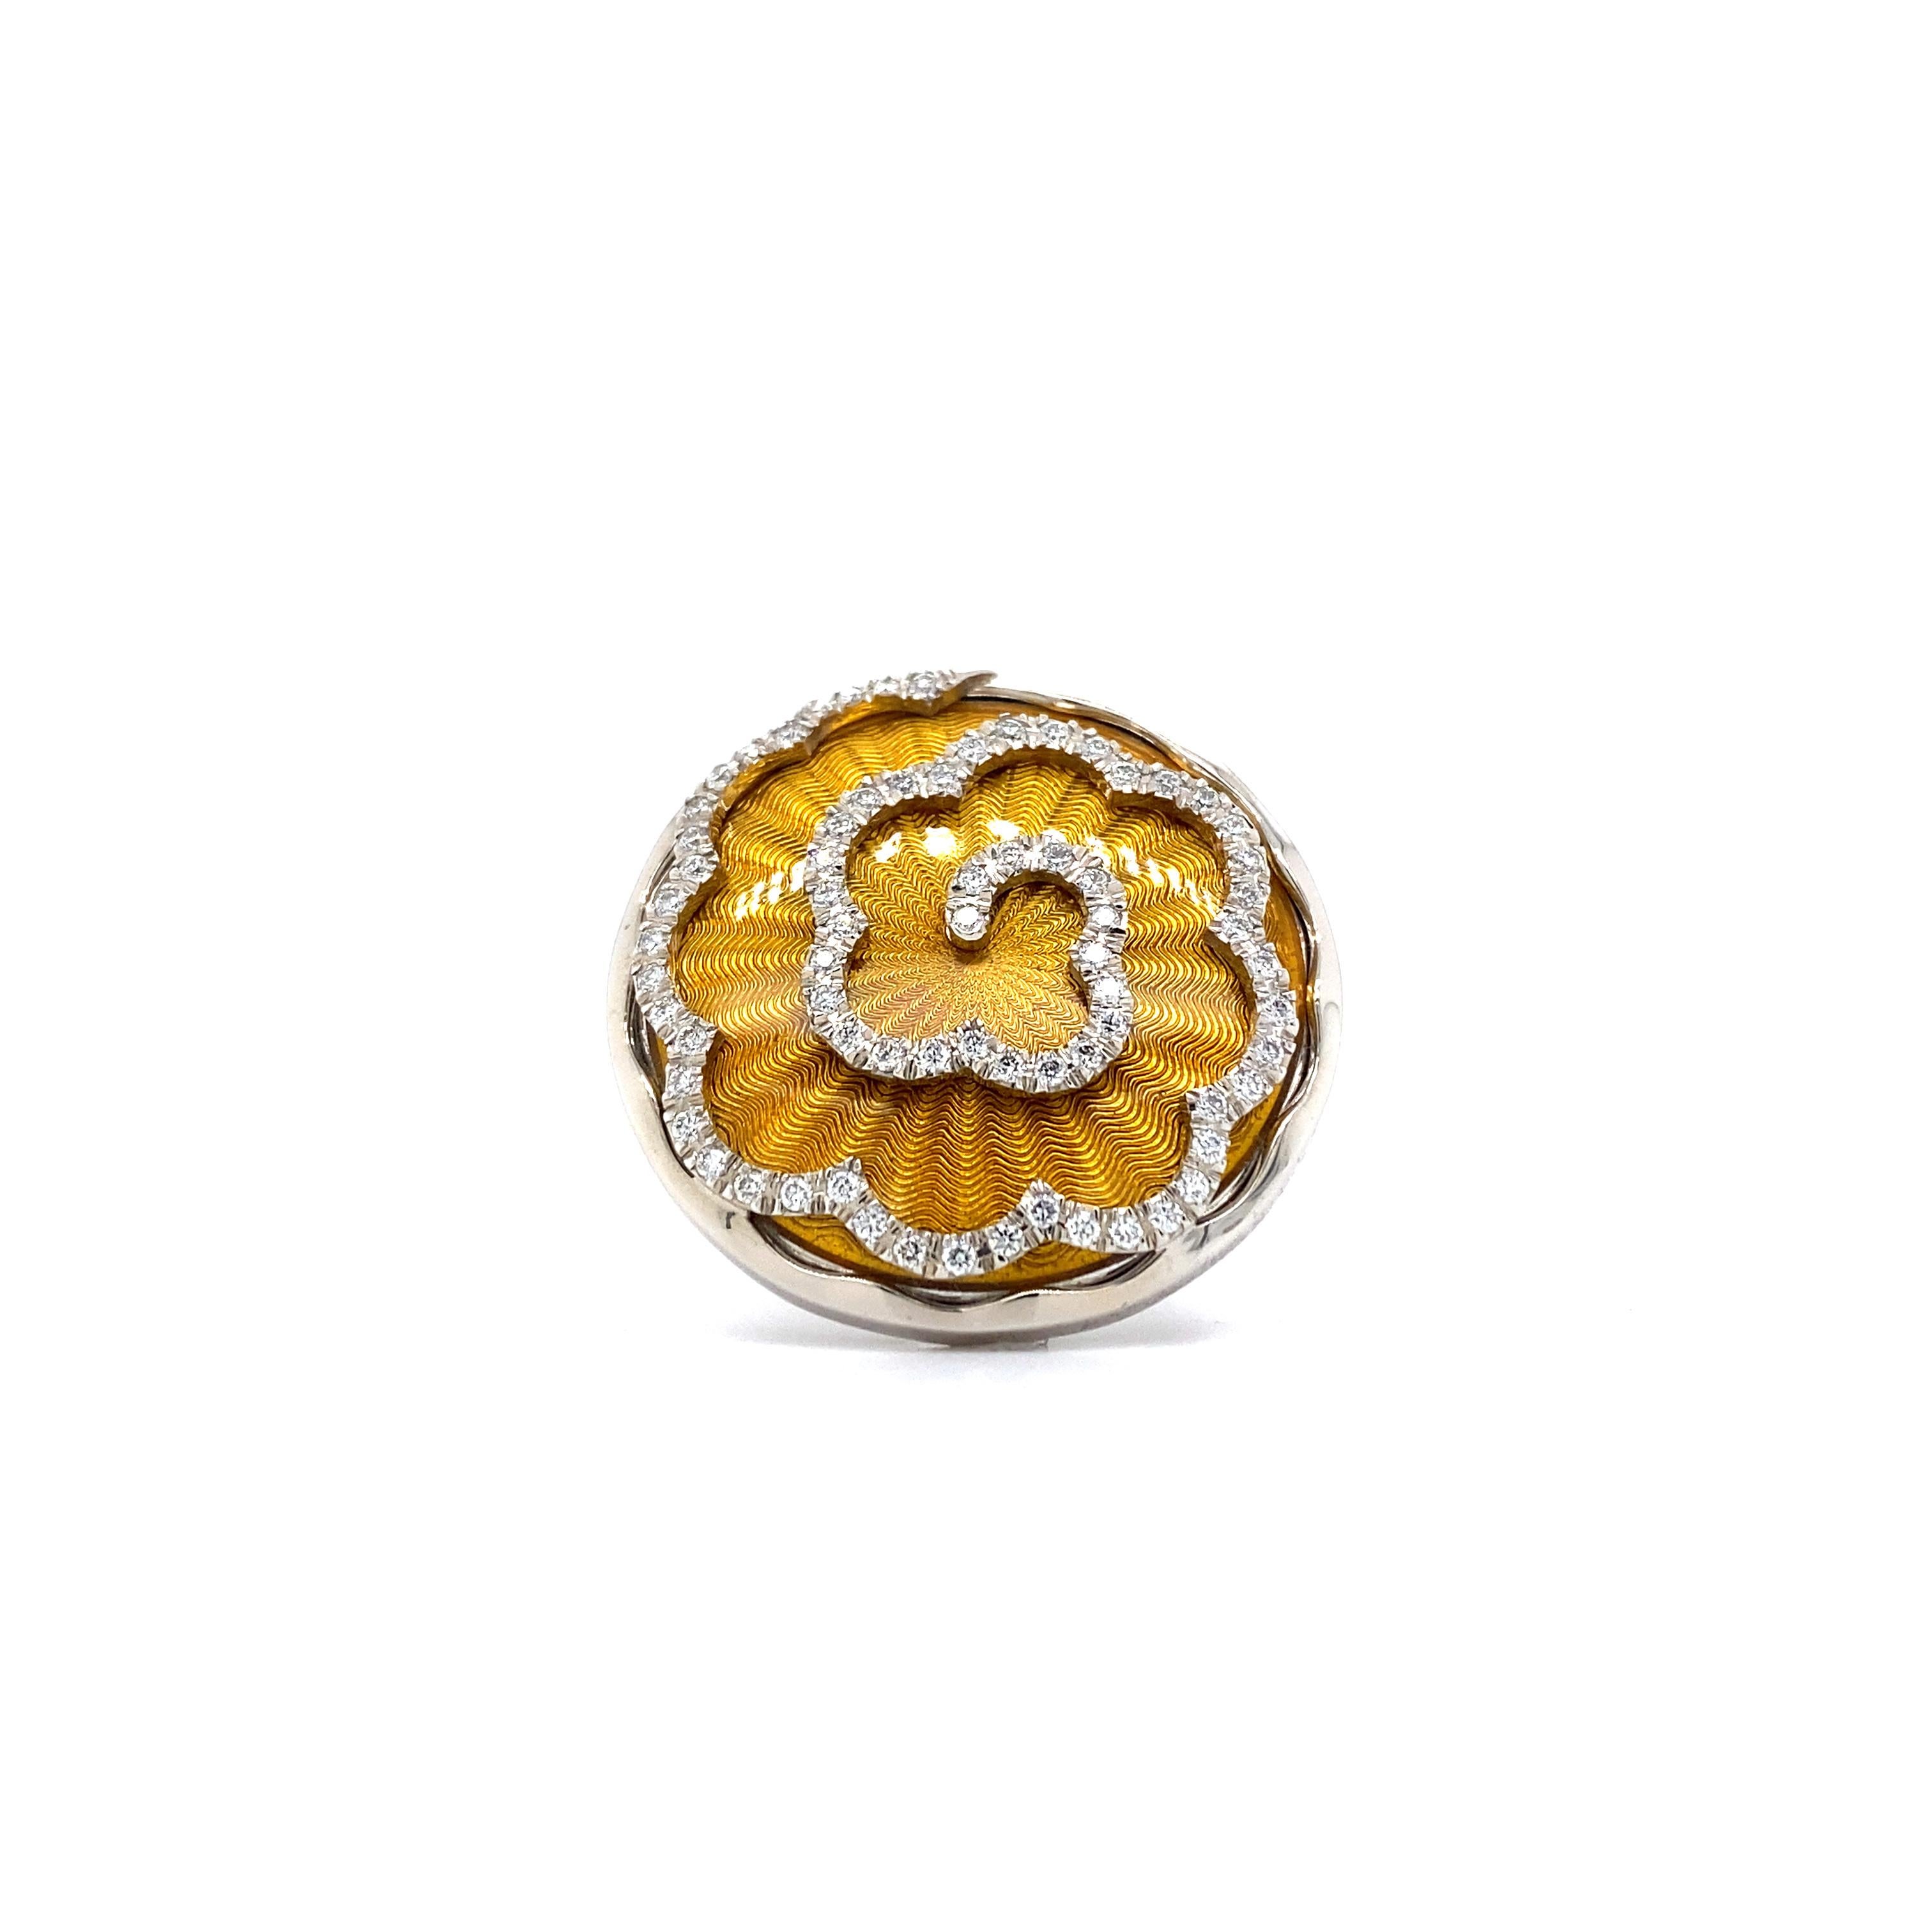 Brilliant Cut Round Amber Yellow Enamel Ring 18k White Gold 72 diamonds 0.53 ct 27 mm For Sale